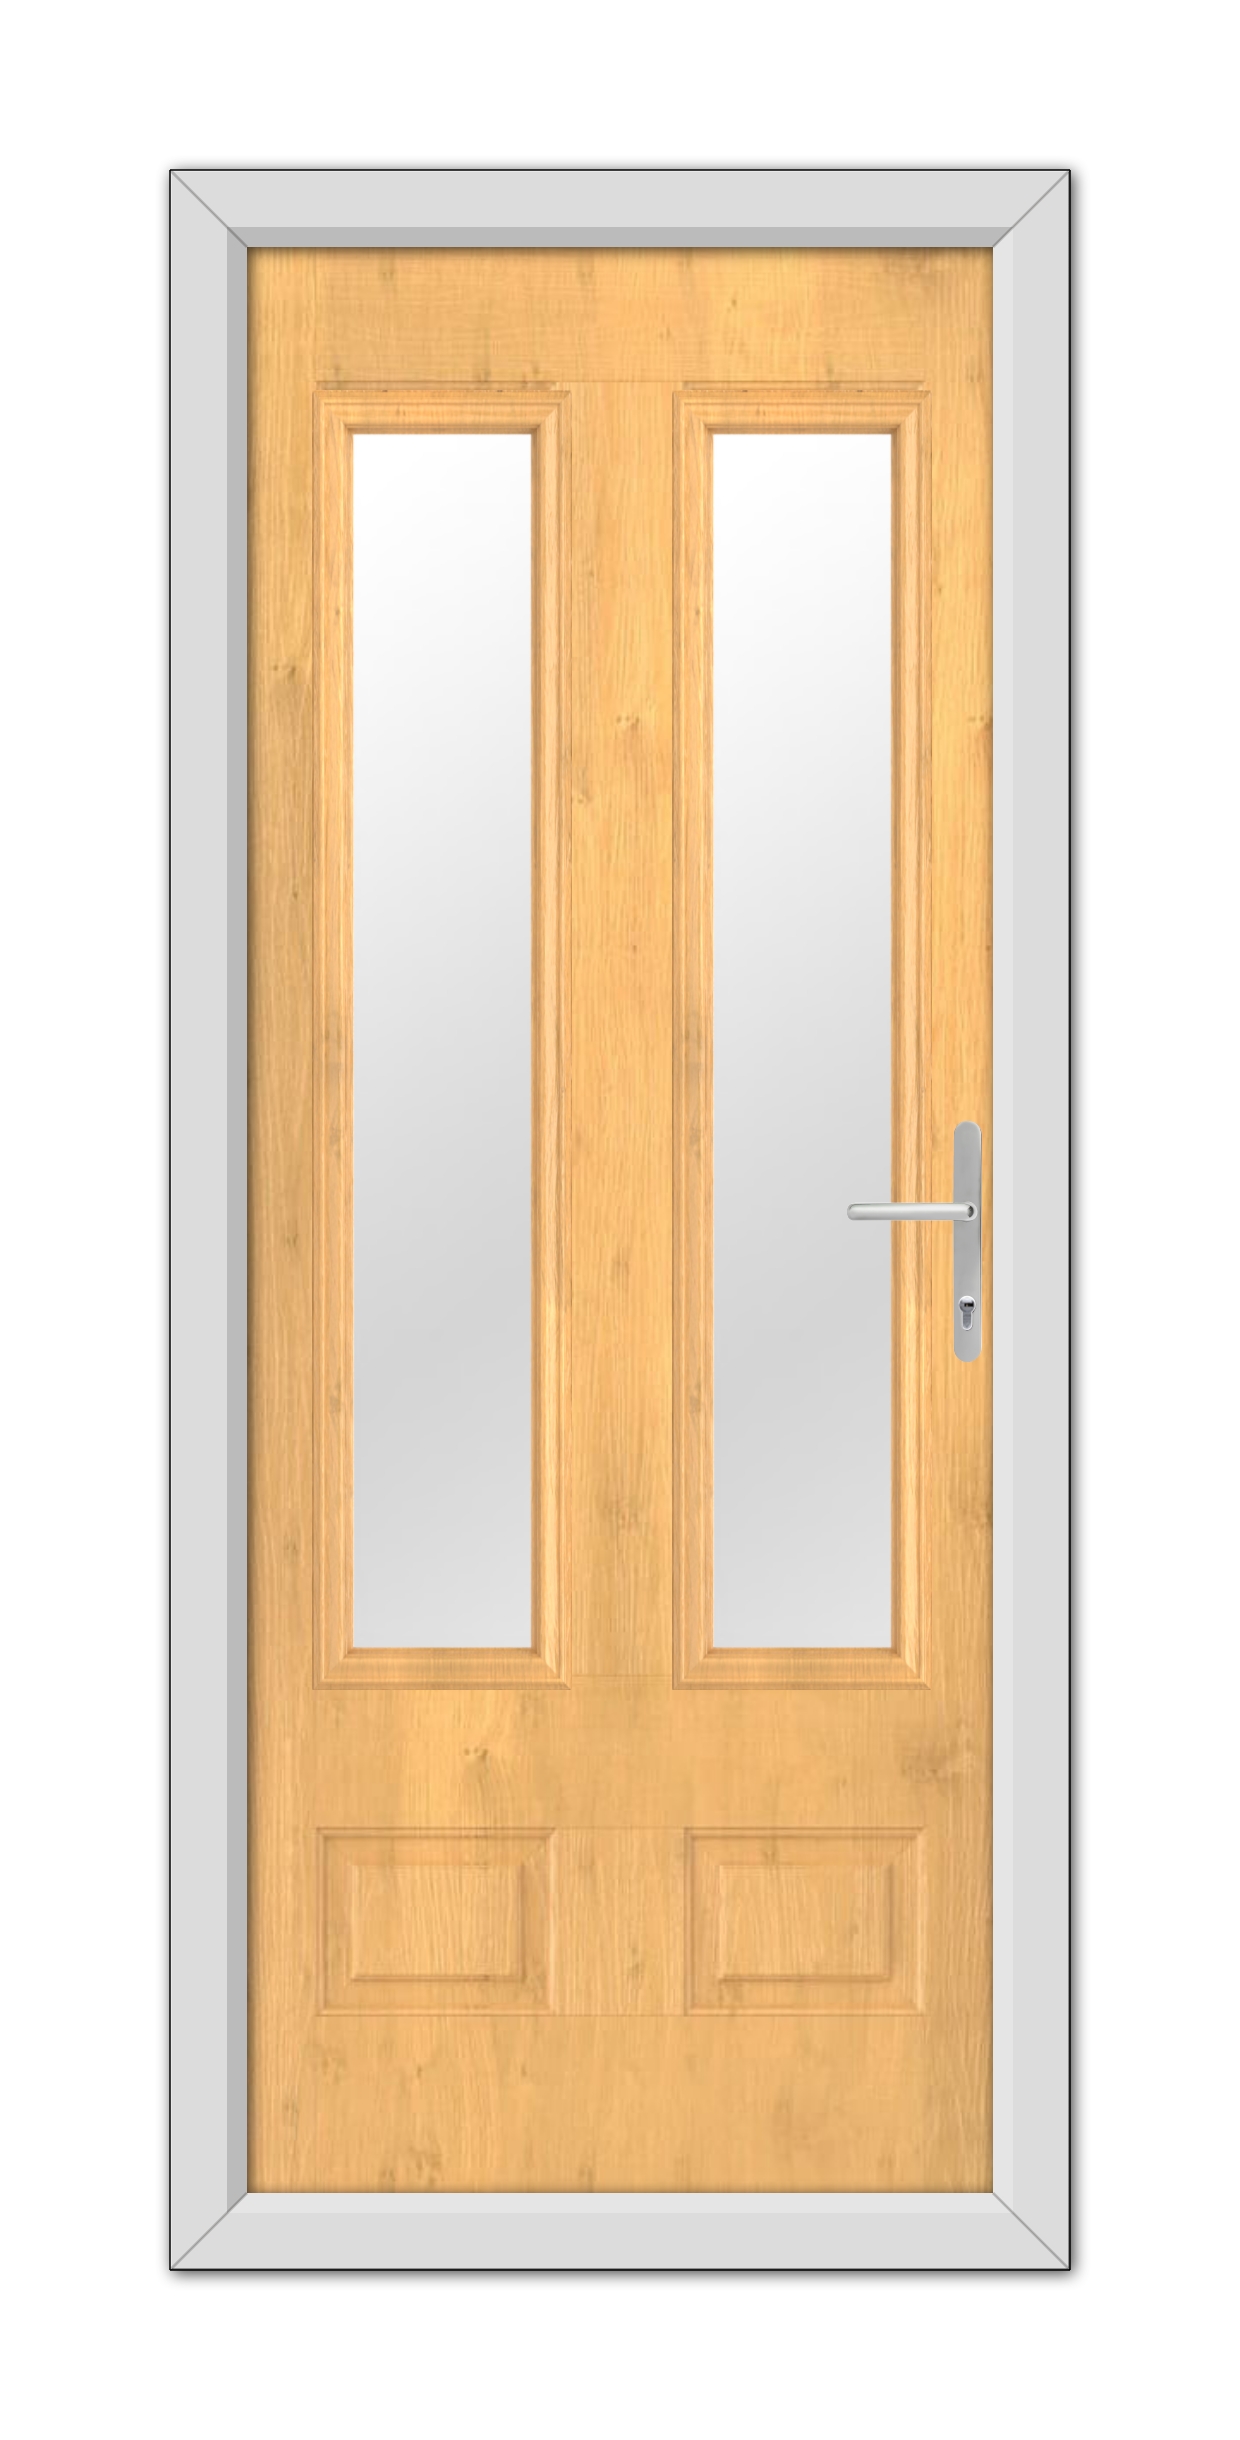 A modern Irish Oak Aston Glazed 2 Composite Door 48mm Timber Core with glass panels and a stainless steel handle, set in a simple gray frame.